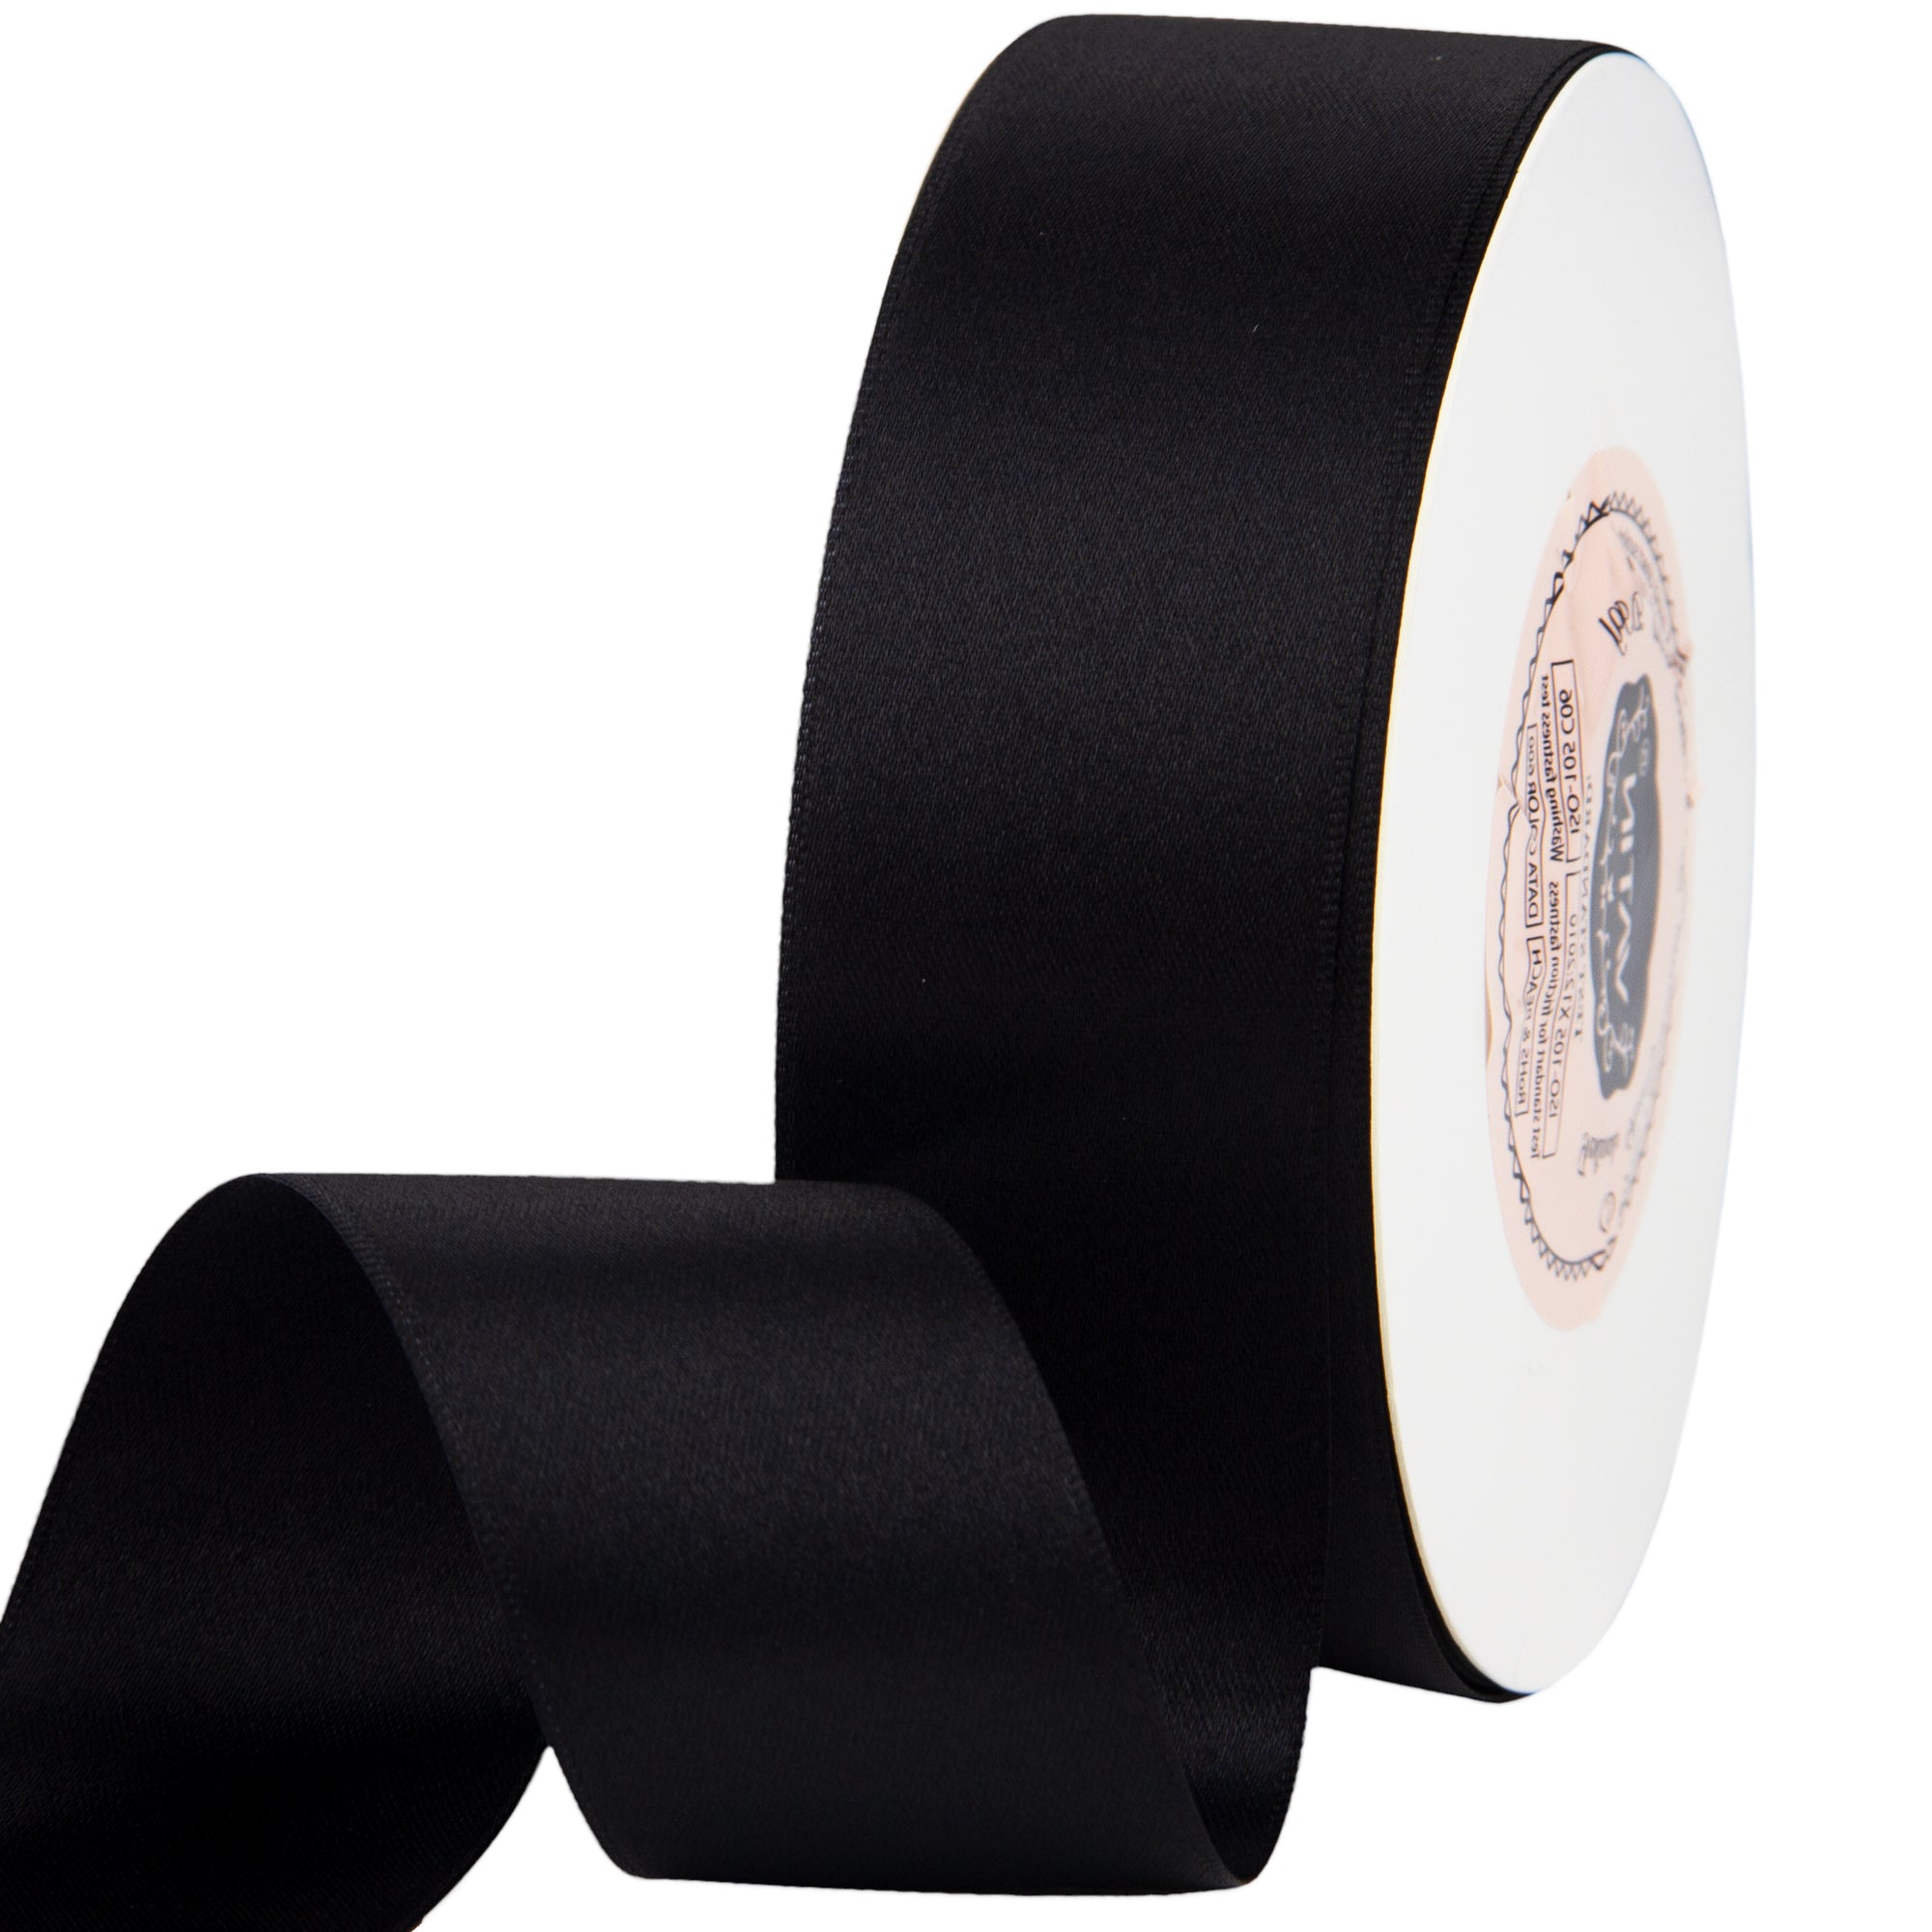 Topenca Supplies Black Ribbon 1/2 Inch x 50 Yards Double Face Solid Satin  Ribbon Roll - Elegant Black Ribbon for Gift Wraping, Hair, Wedding, Sewing